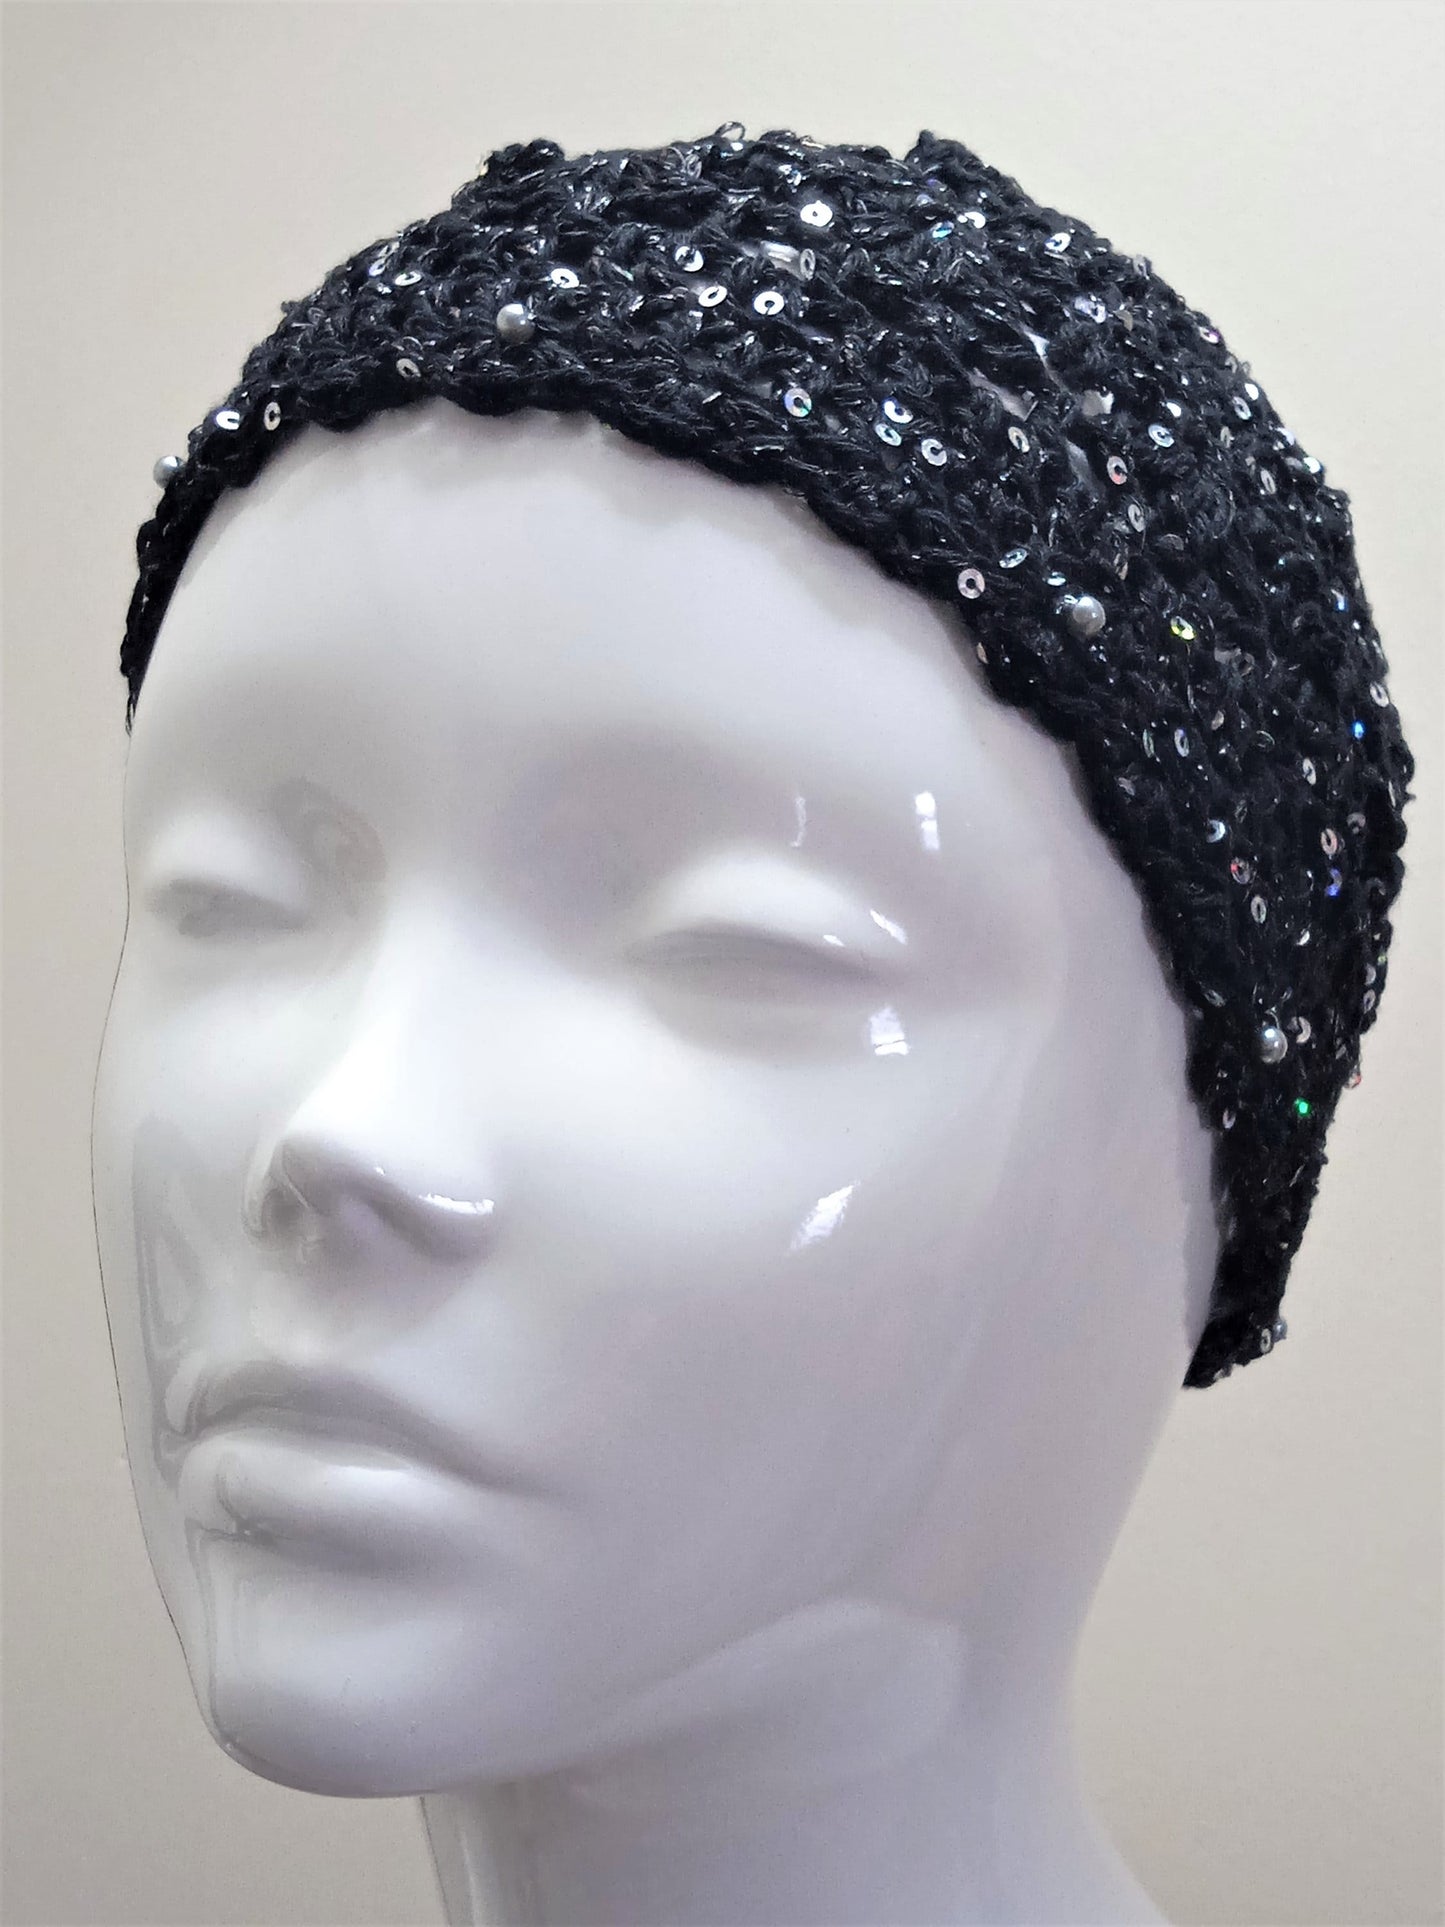 Crochet Black Skull Cap with Silver Sequins and Beads